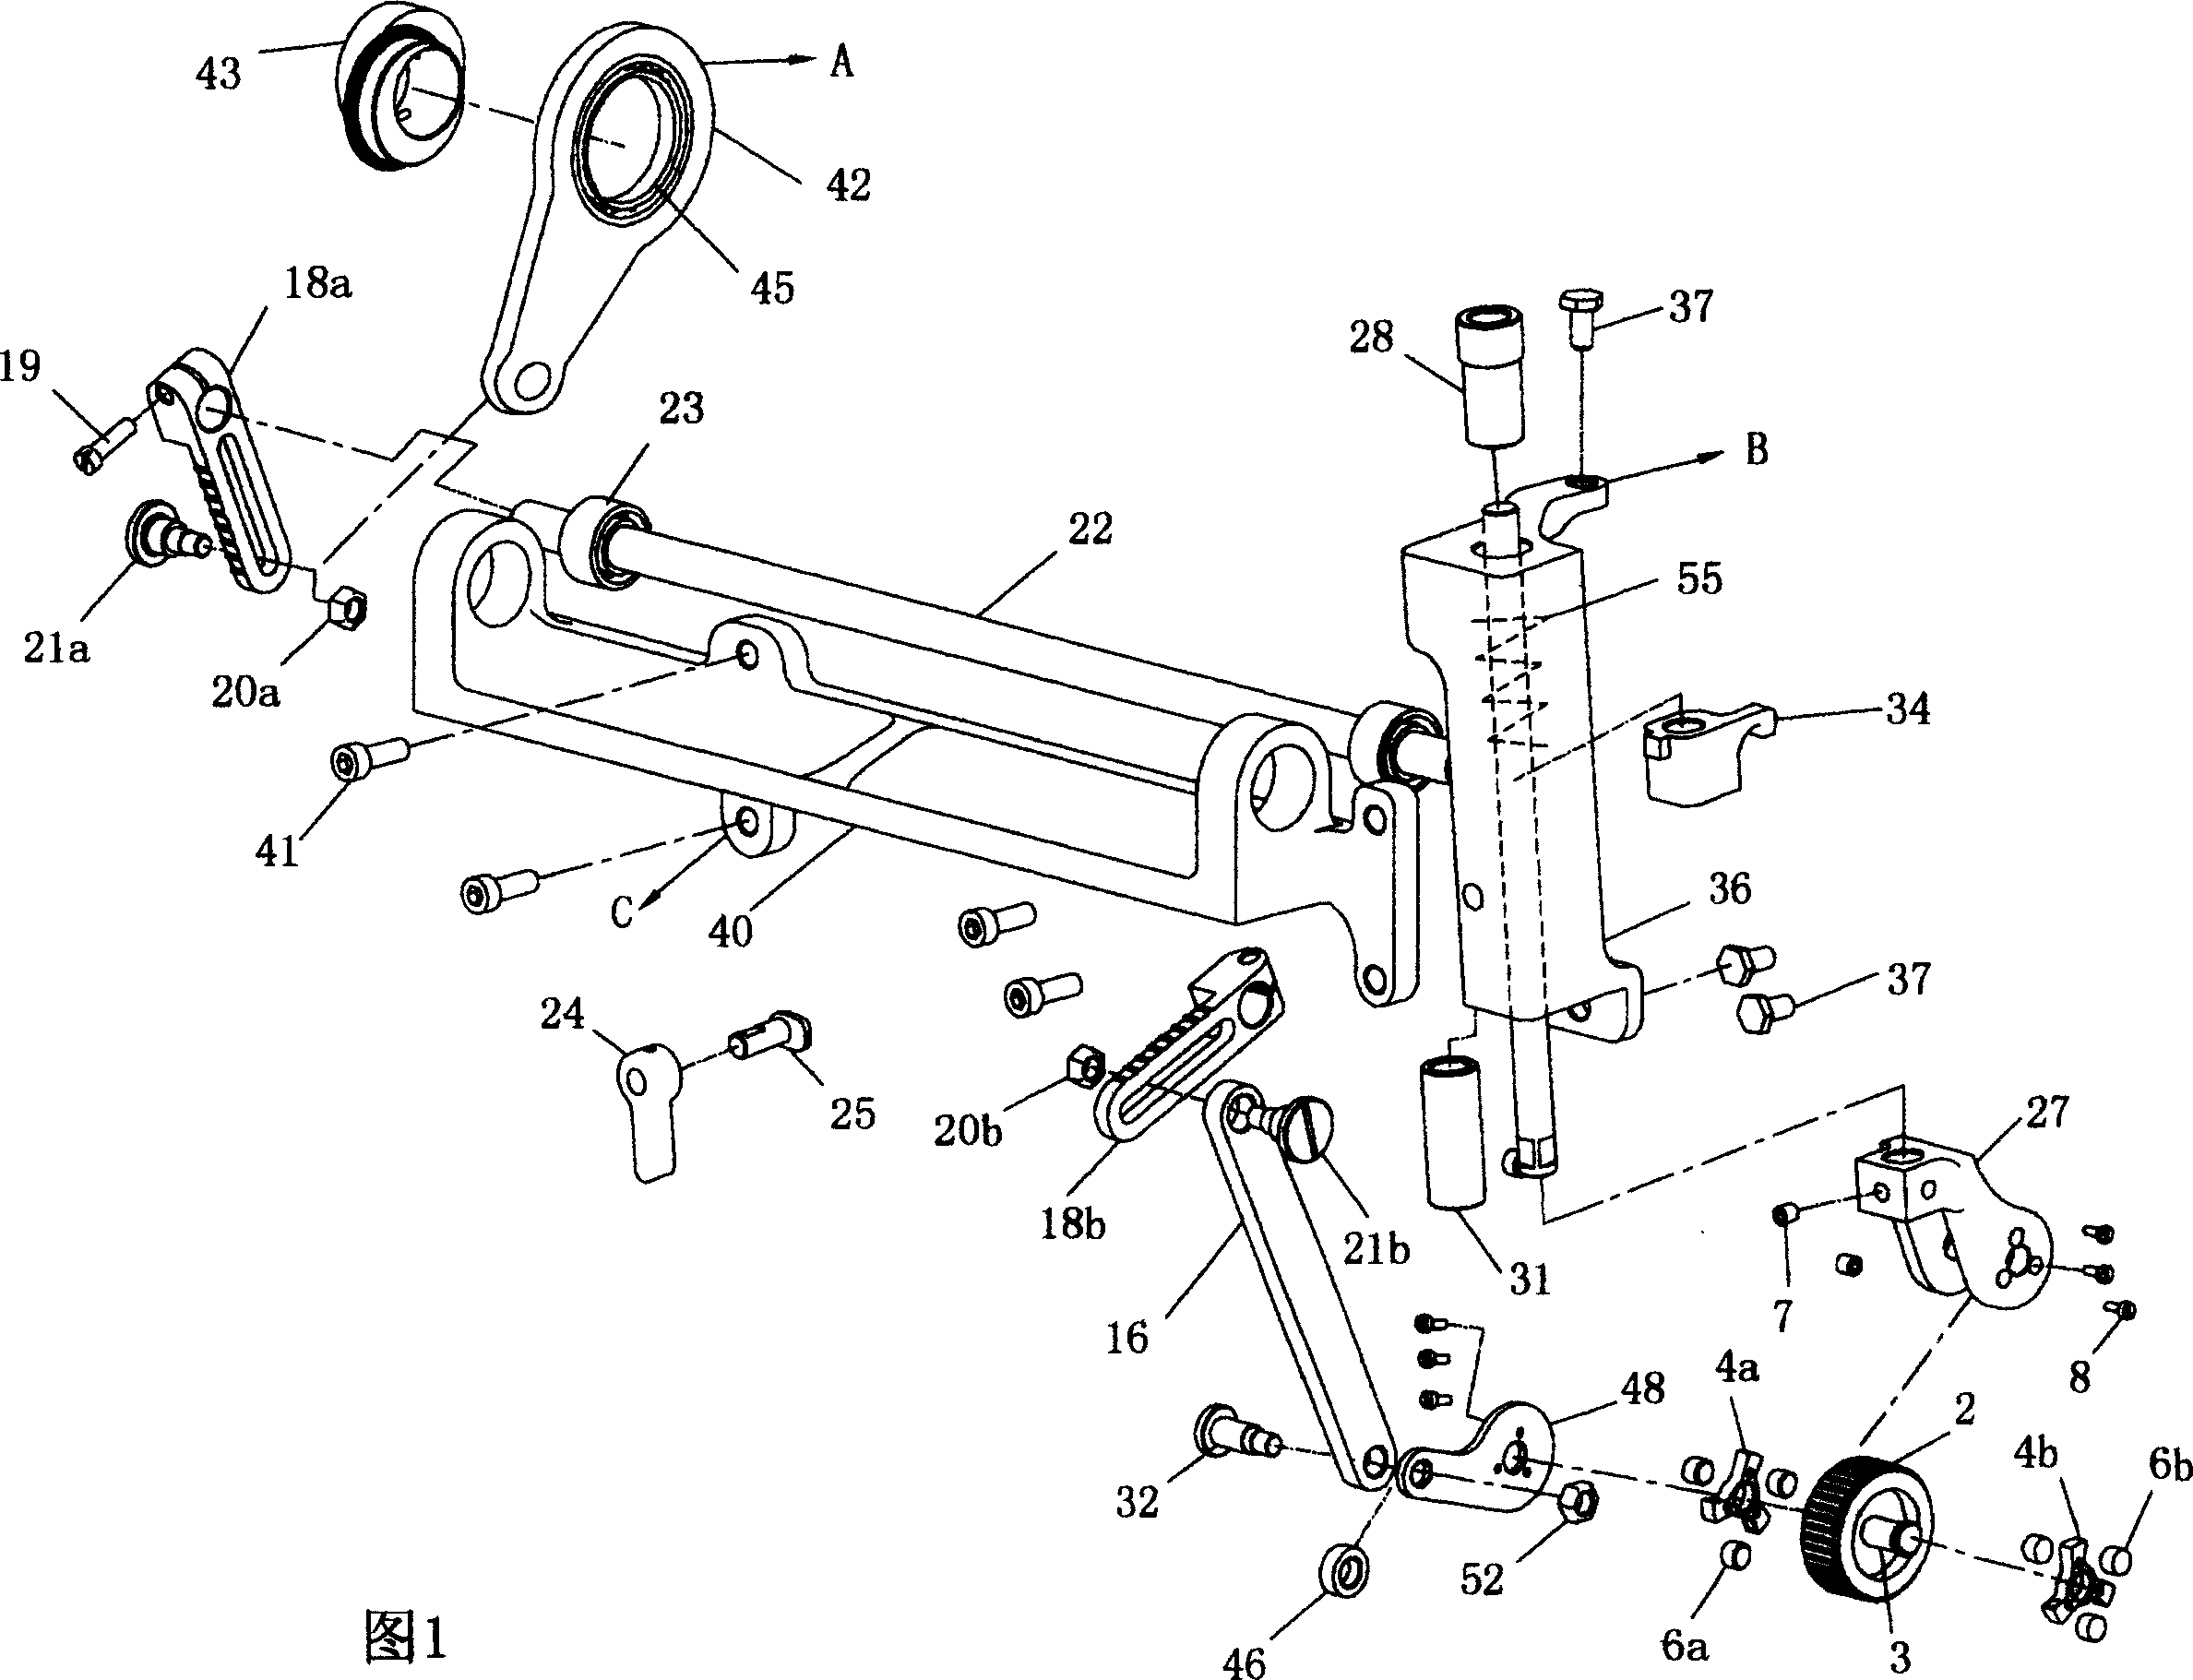 Auxiliary cloth-handling mechanism for sewing machine